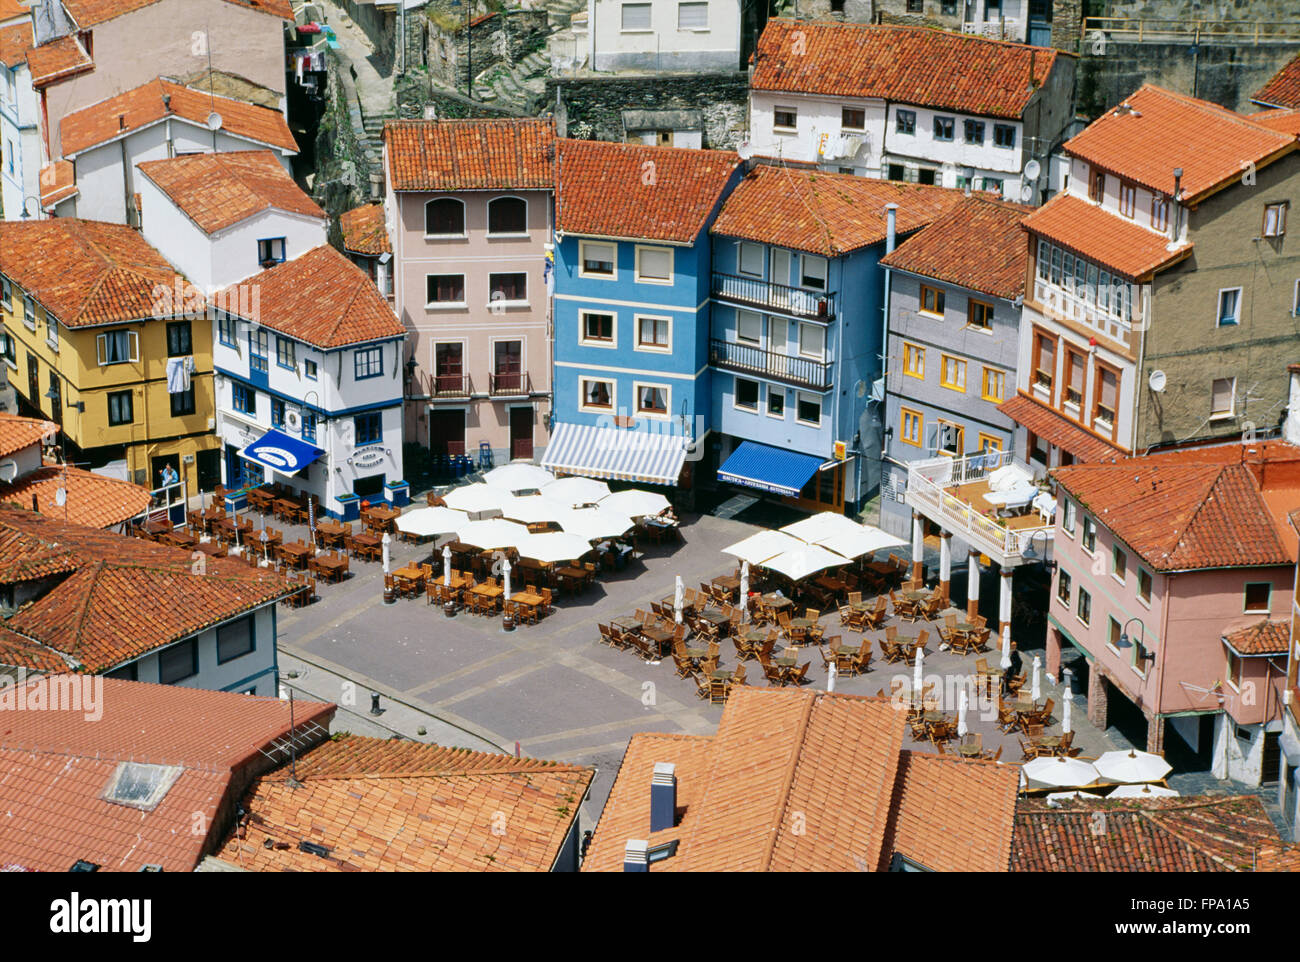 Overview of the Main Square of Cudillero, Spain Stock Photo